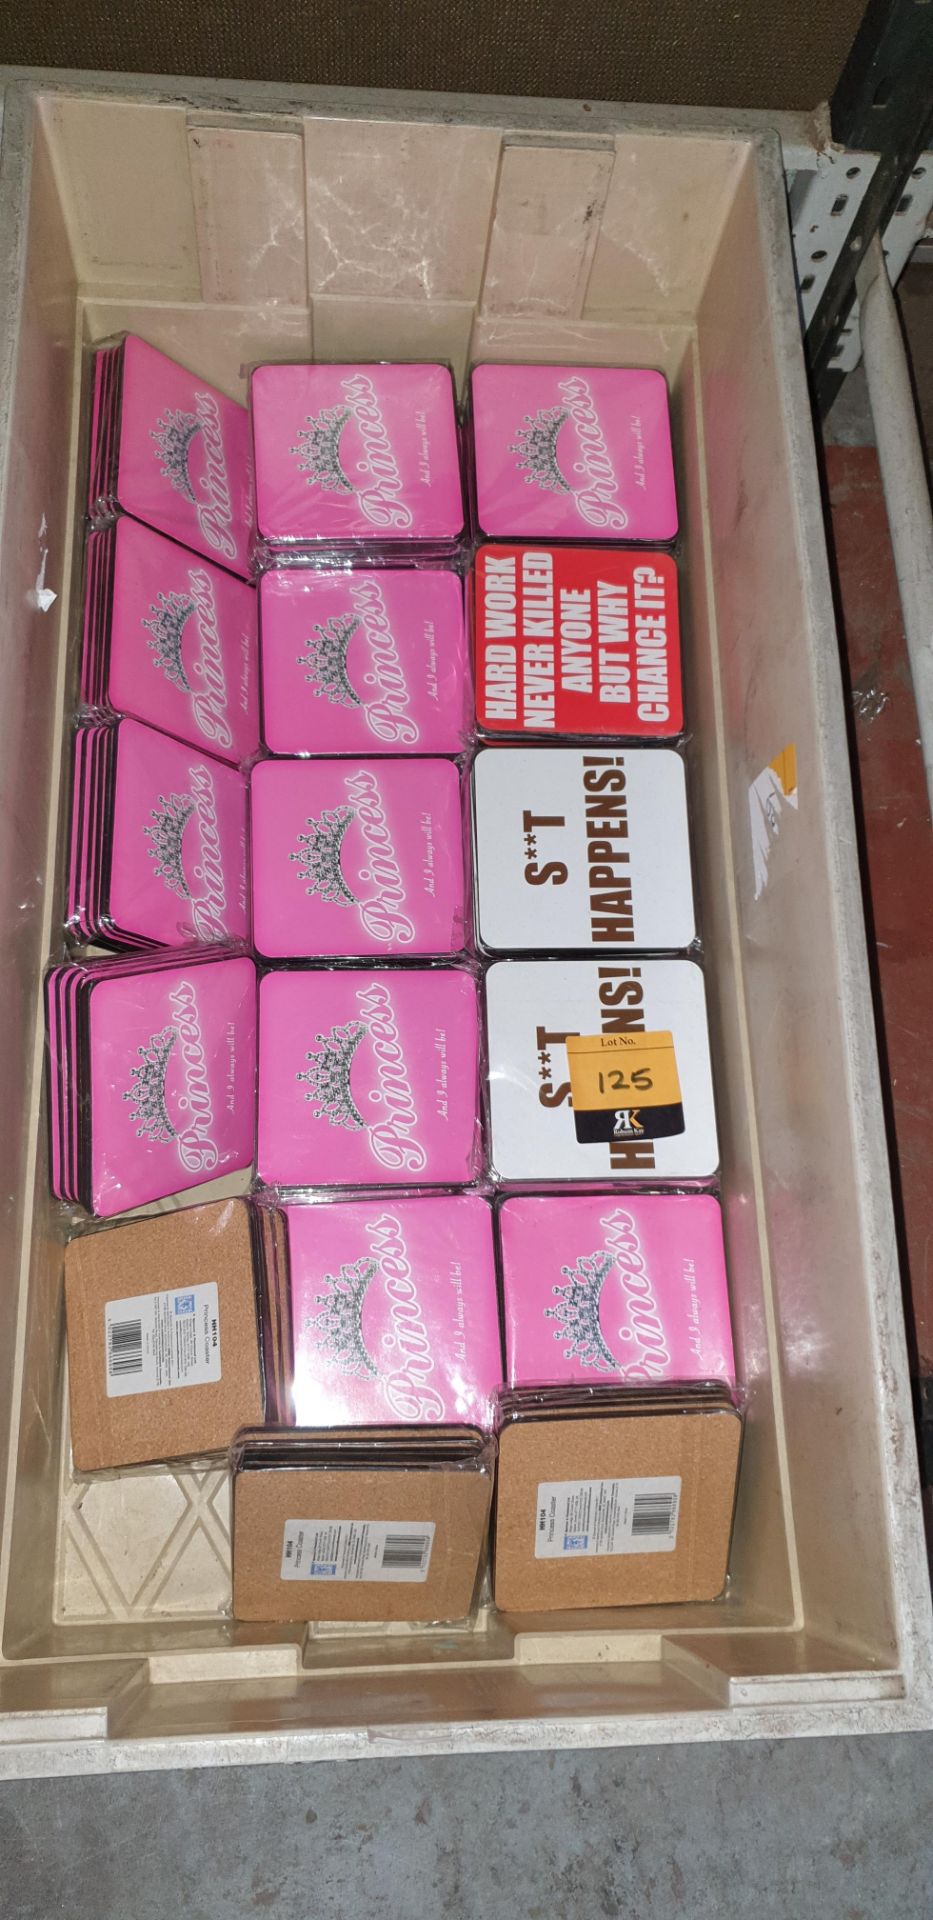 Contents of a crate of assorted Princess novelty drinks coasters - crate excluded